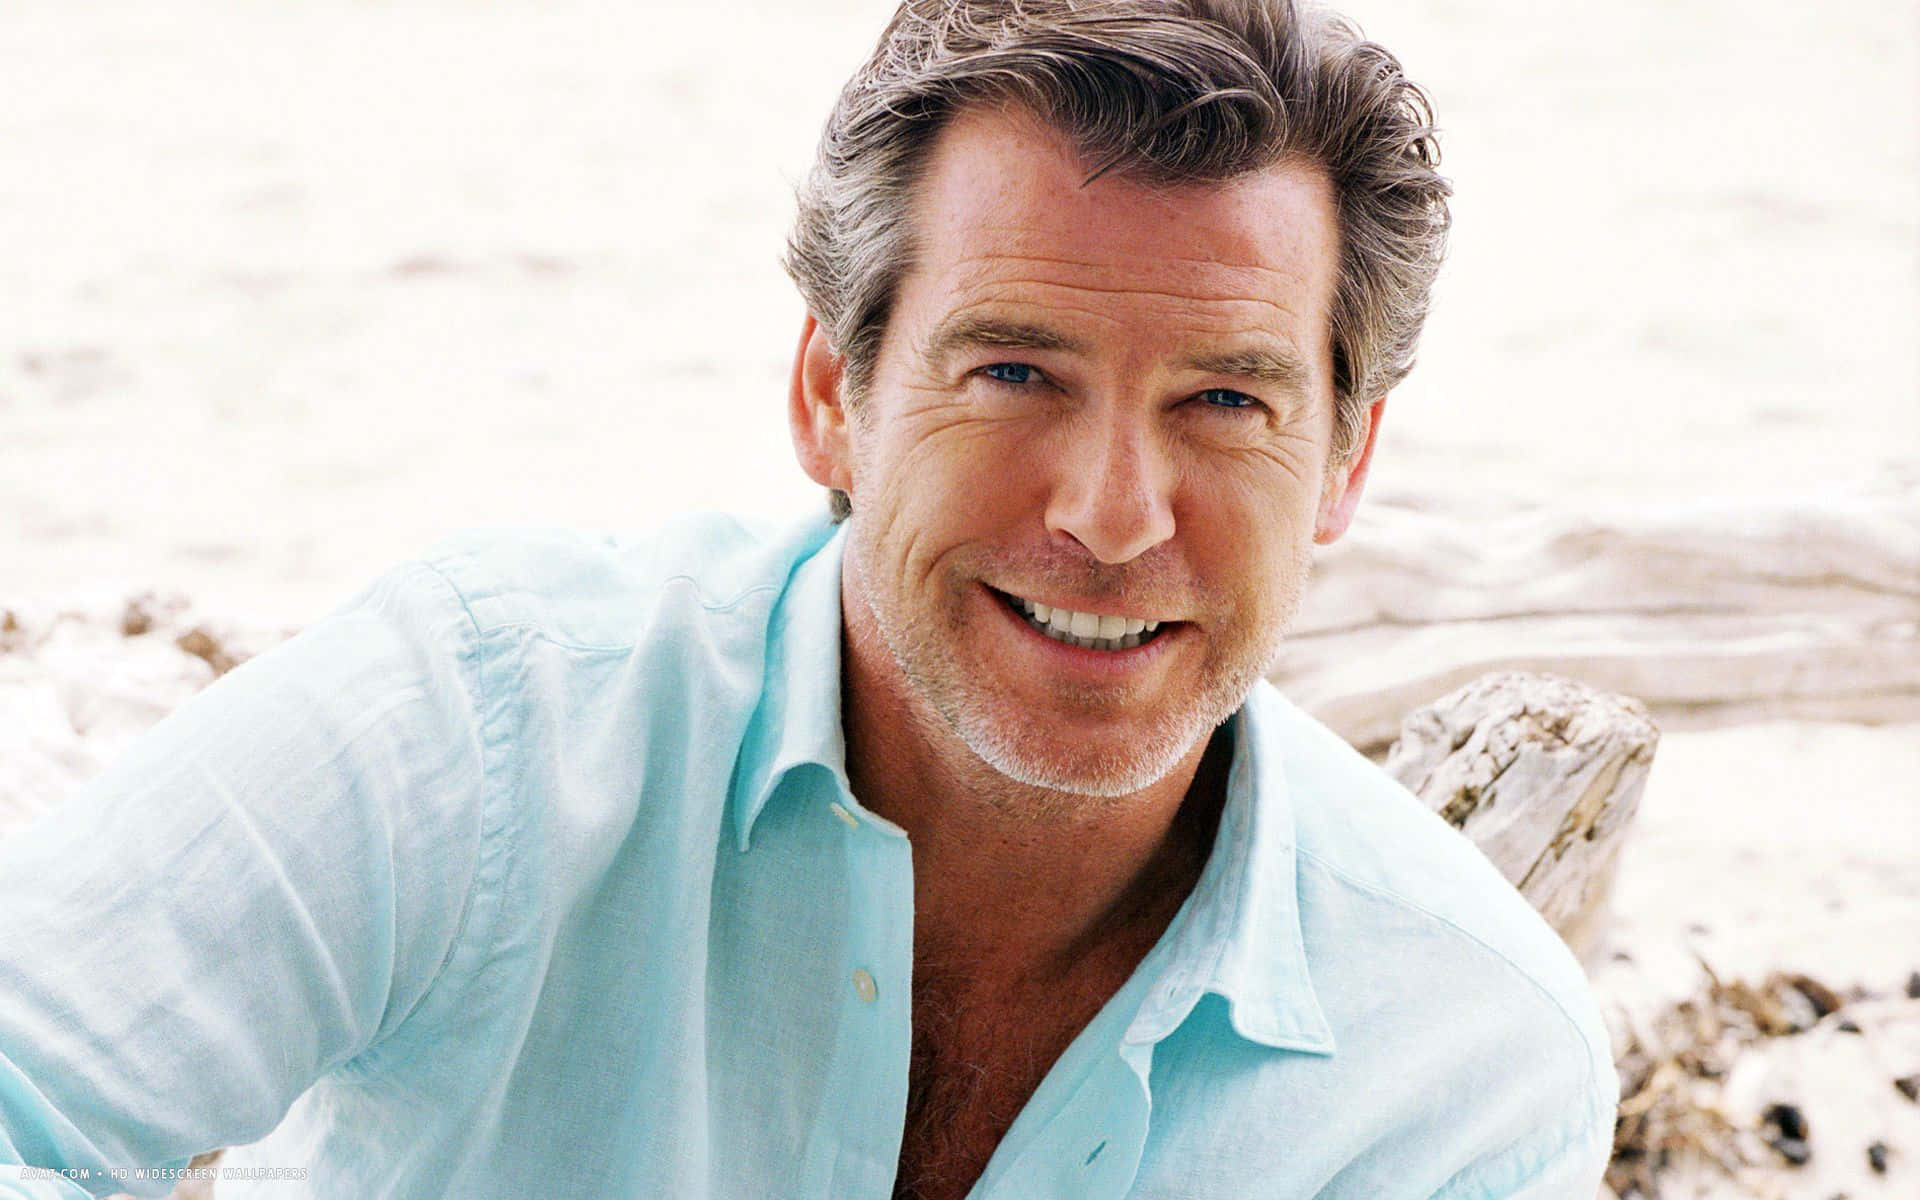 Pierce Brosnan Looks Dashing In A Black And White Suit. Wallpaper